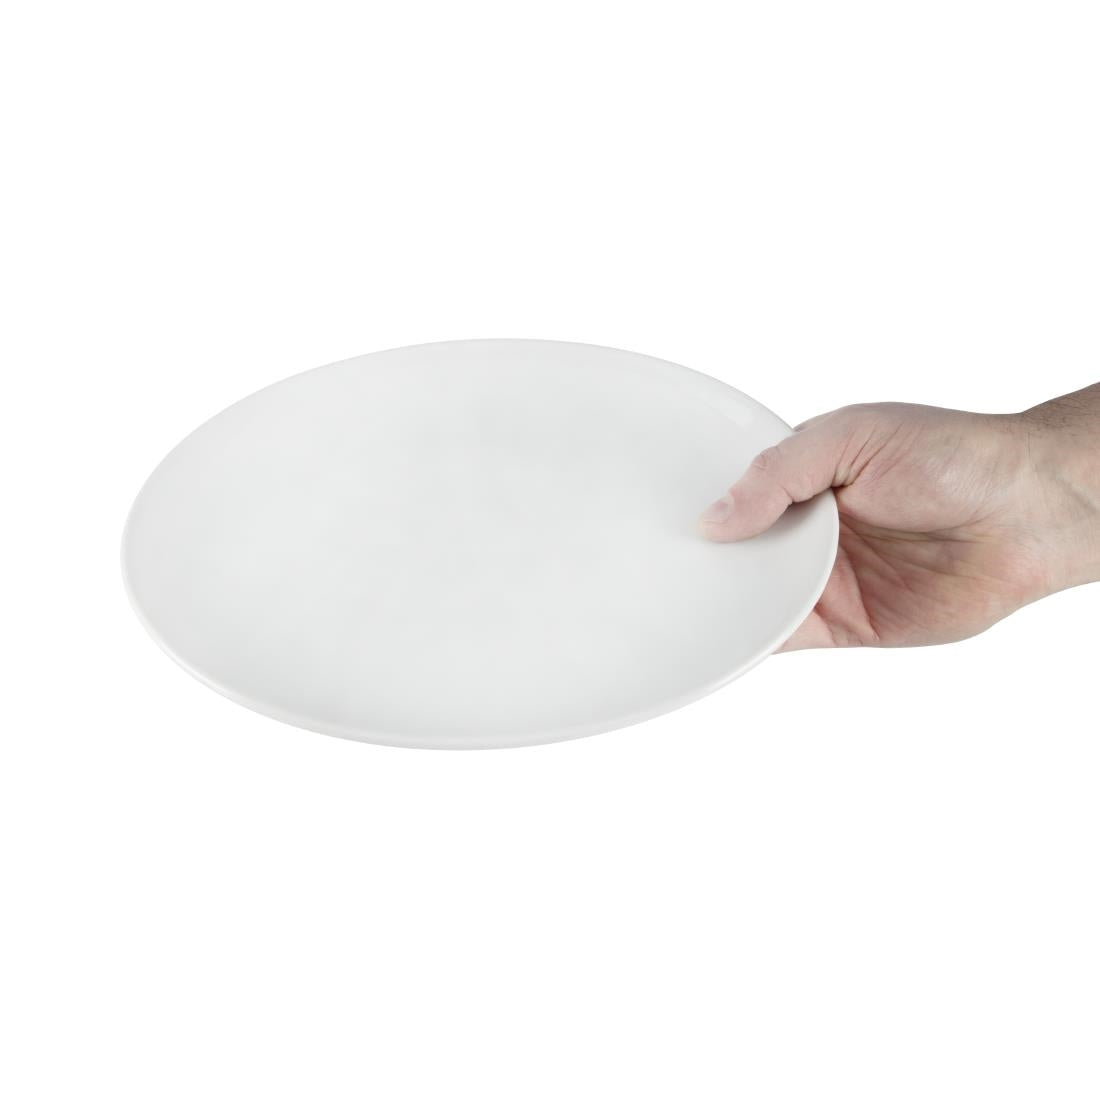 Athena Hotelware Oval Coupe Plates 254 x 197 mm (Pack of 12) JD Catering Equipment Solutions Ltd